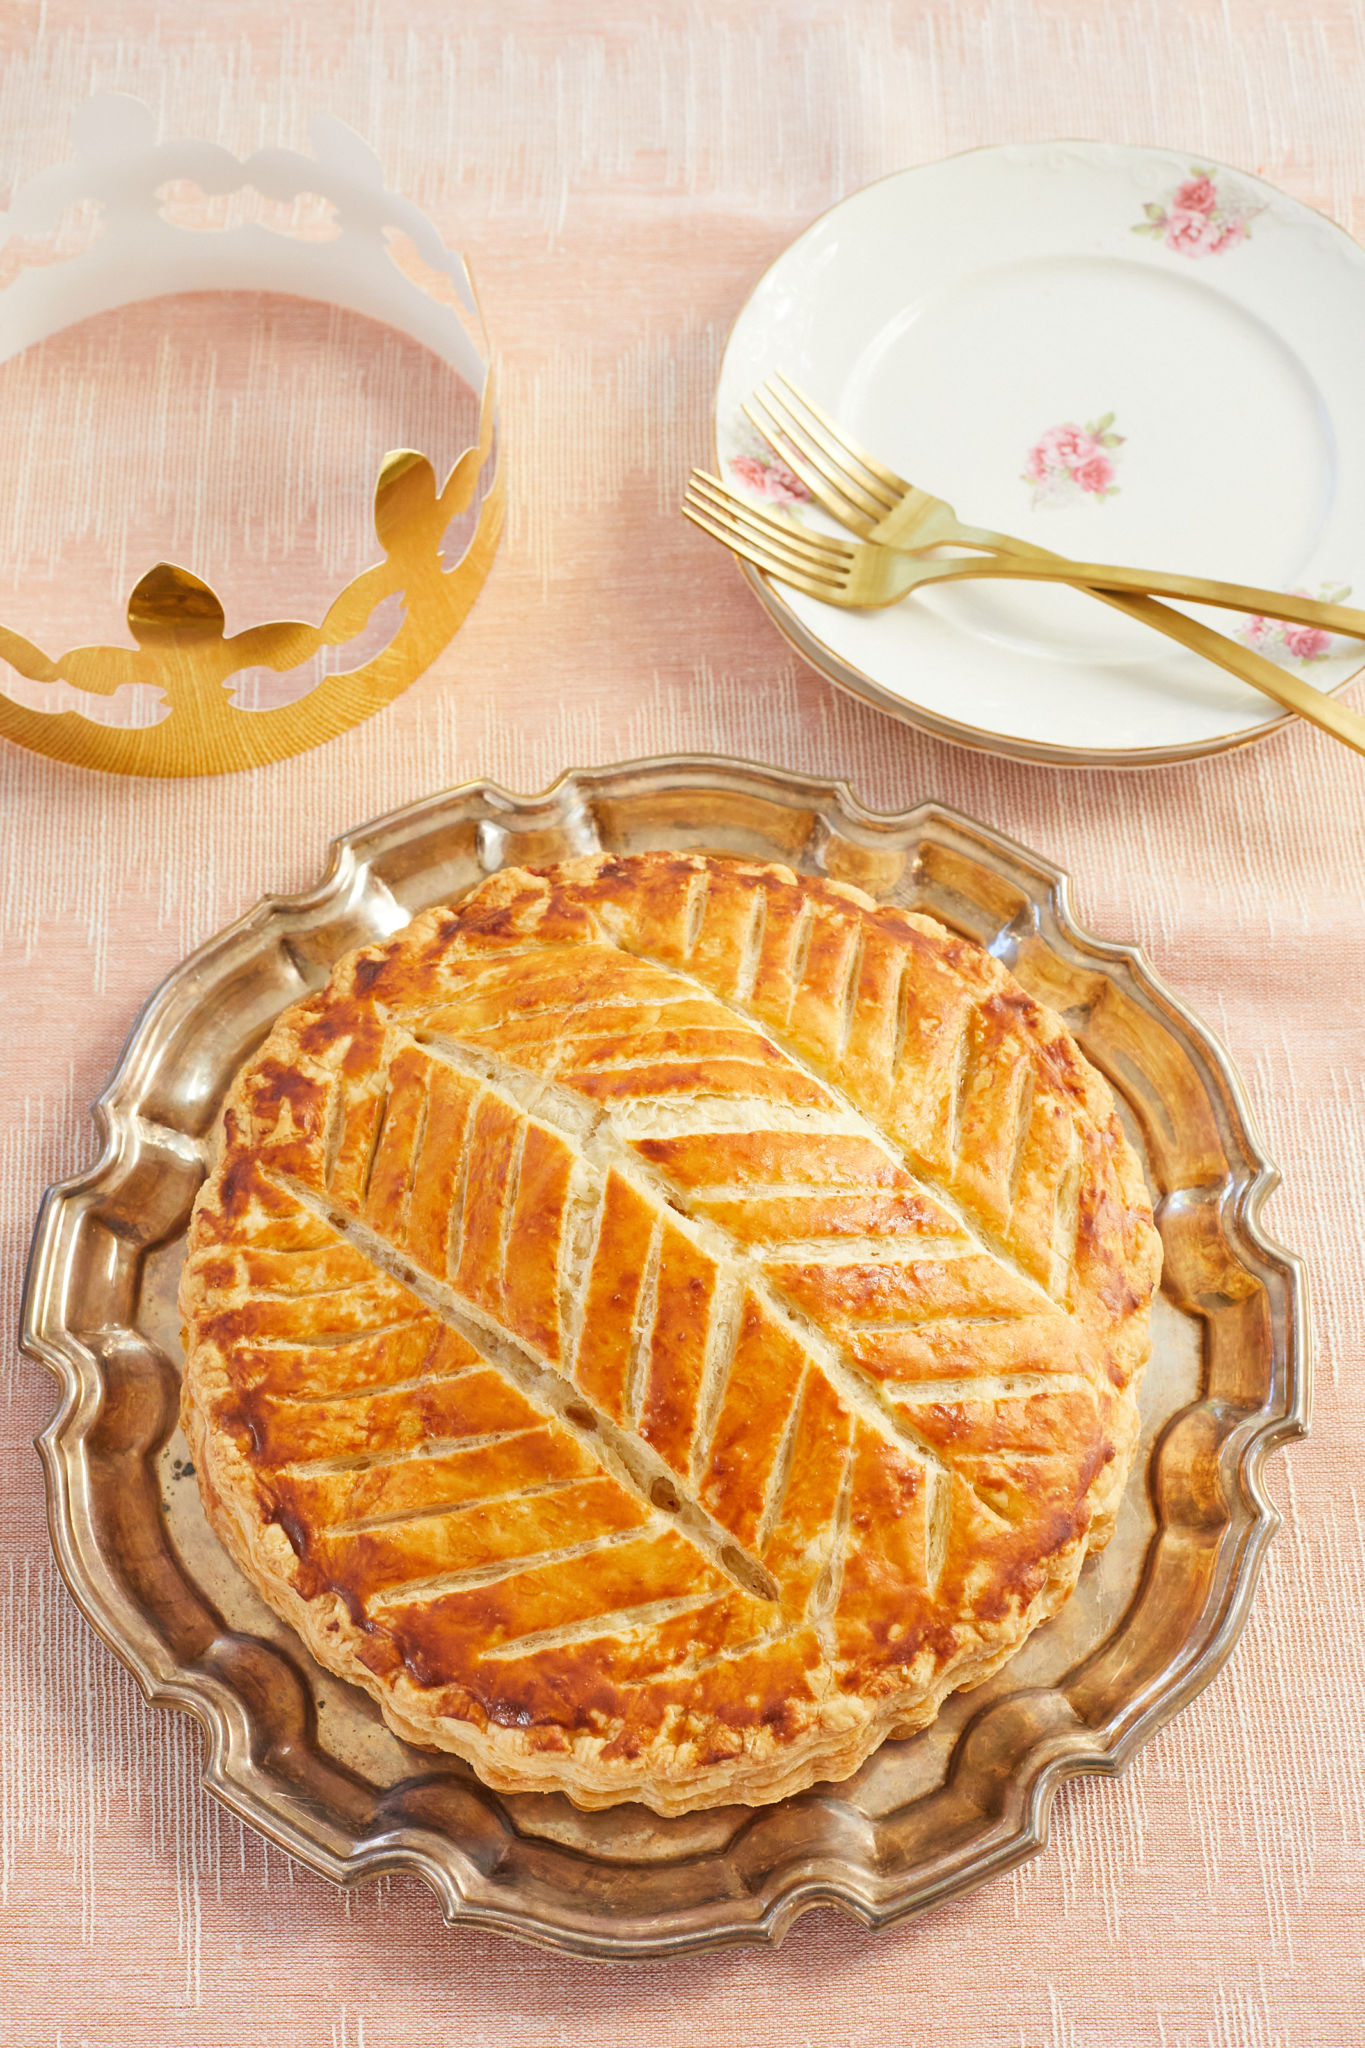 Galette Des Rois, or King Cake, baked next to a crown and plates.